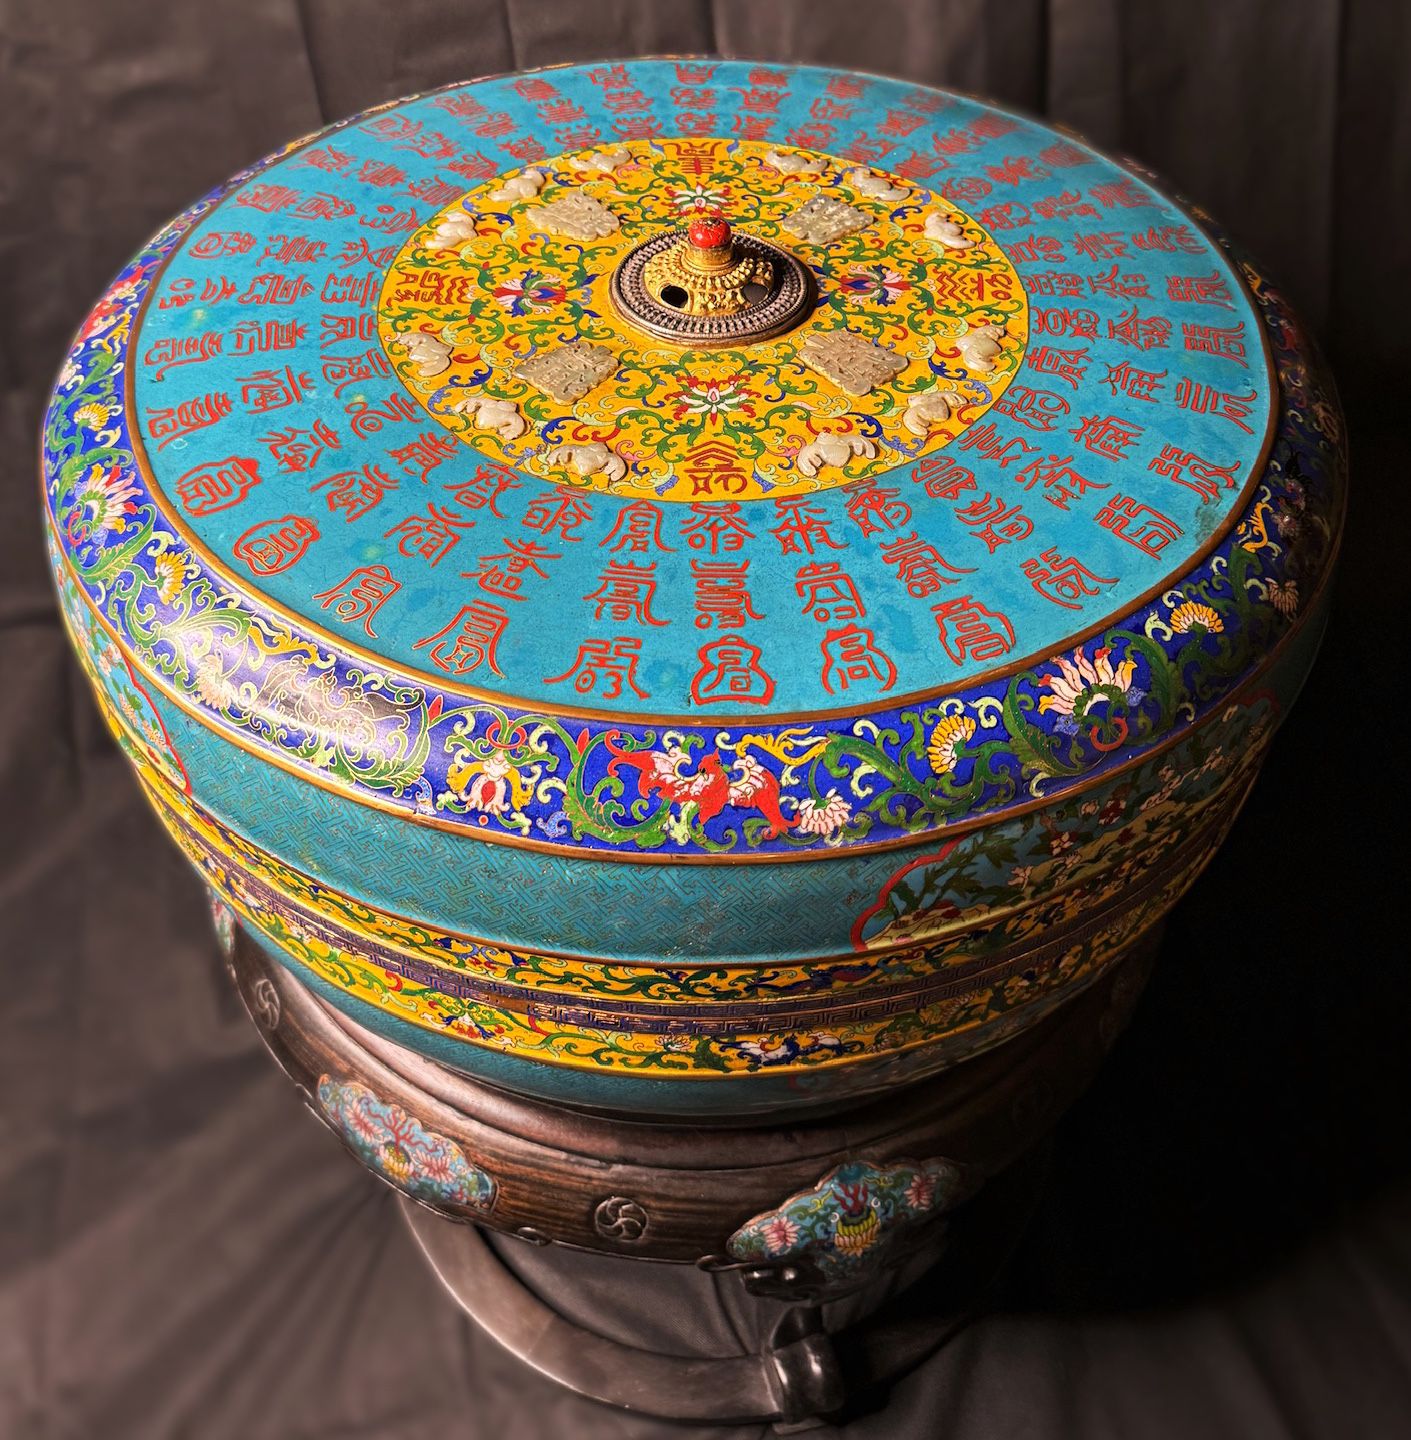 Antique 19th Century Chinese Jade Cloisonné Fish Bowl with Enamel Accents, Coral Adorned Top, and Wooden Table